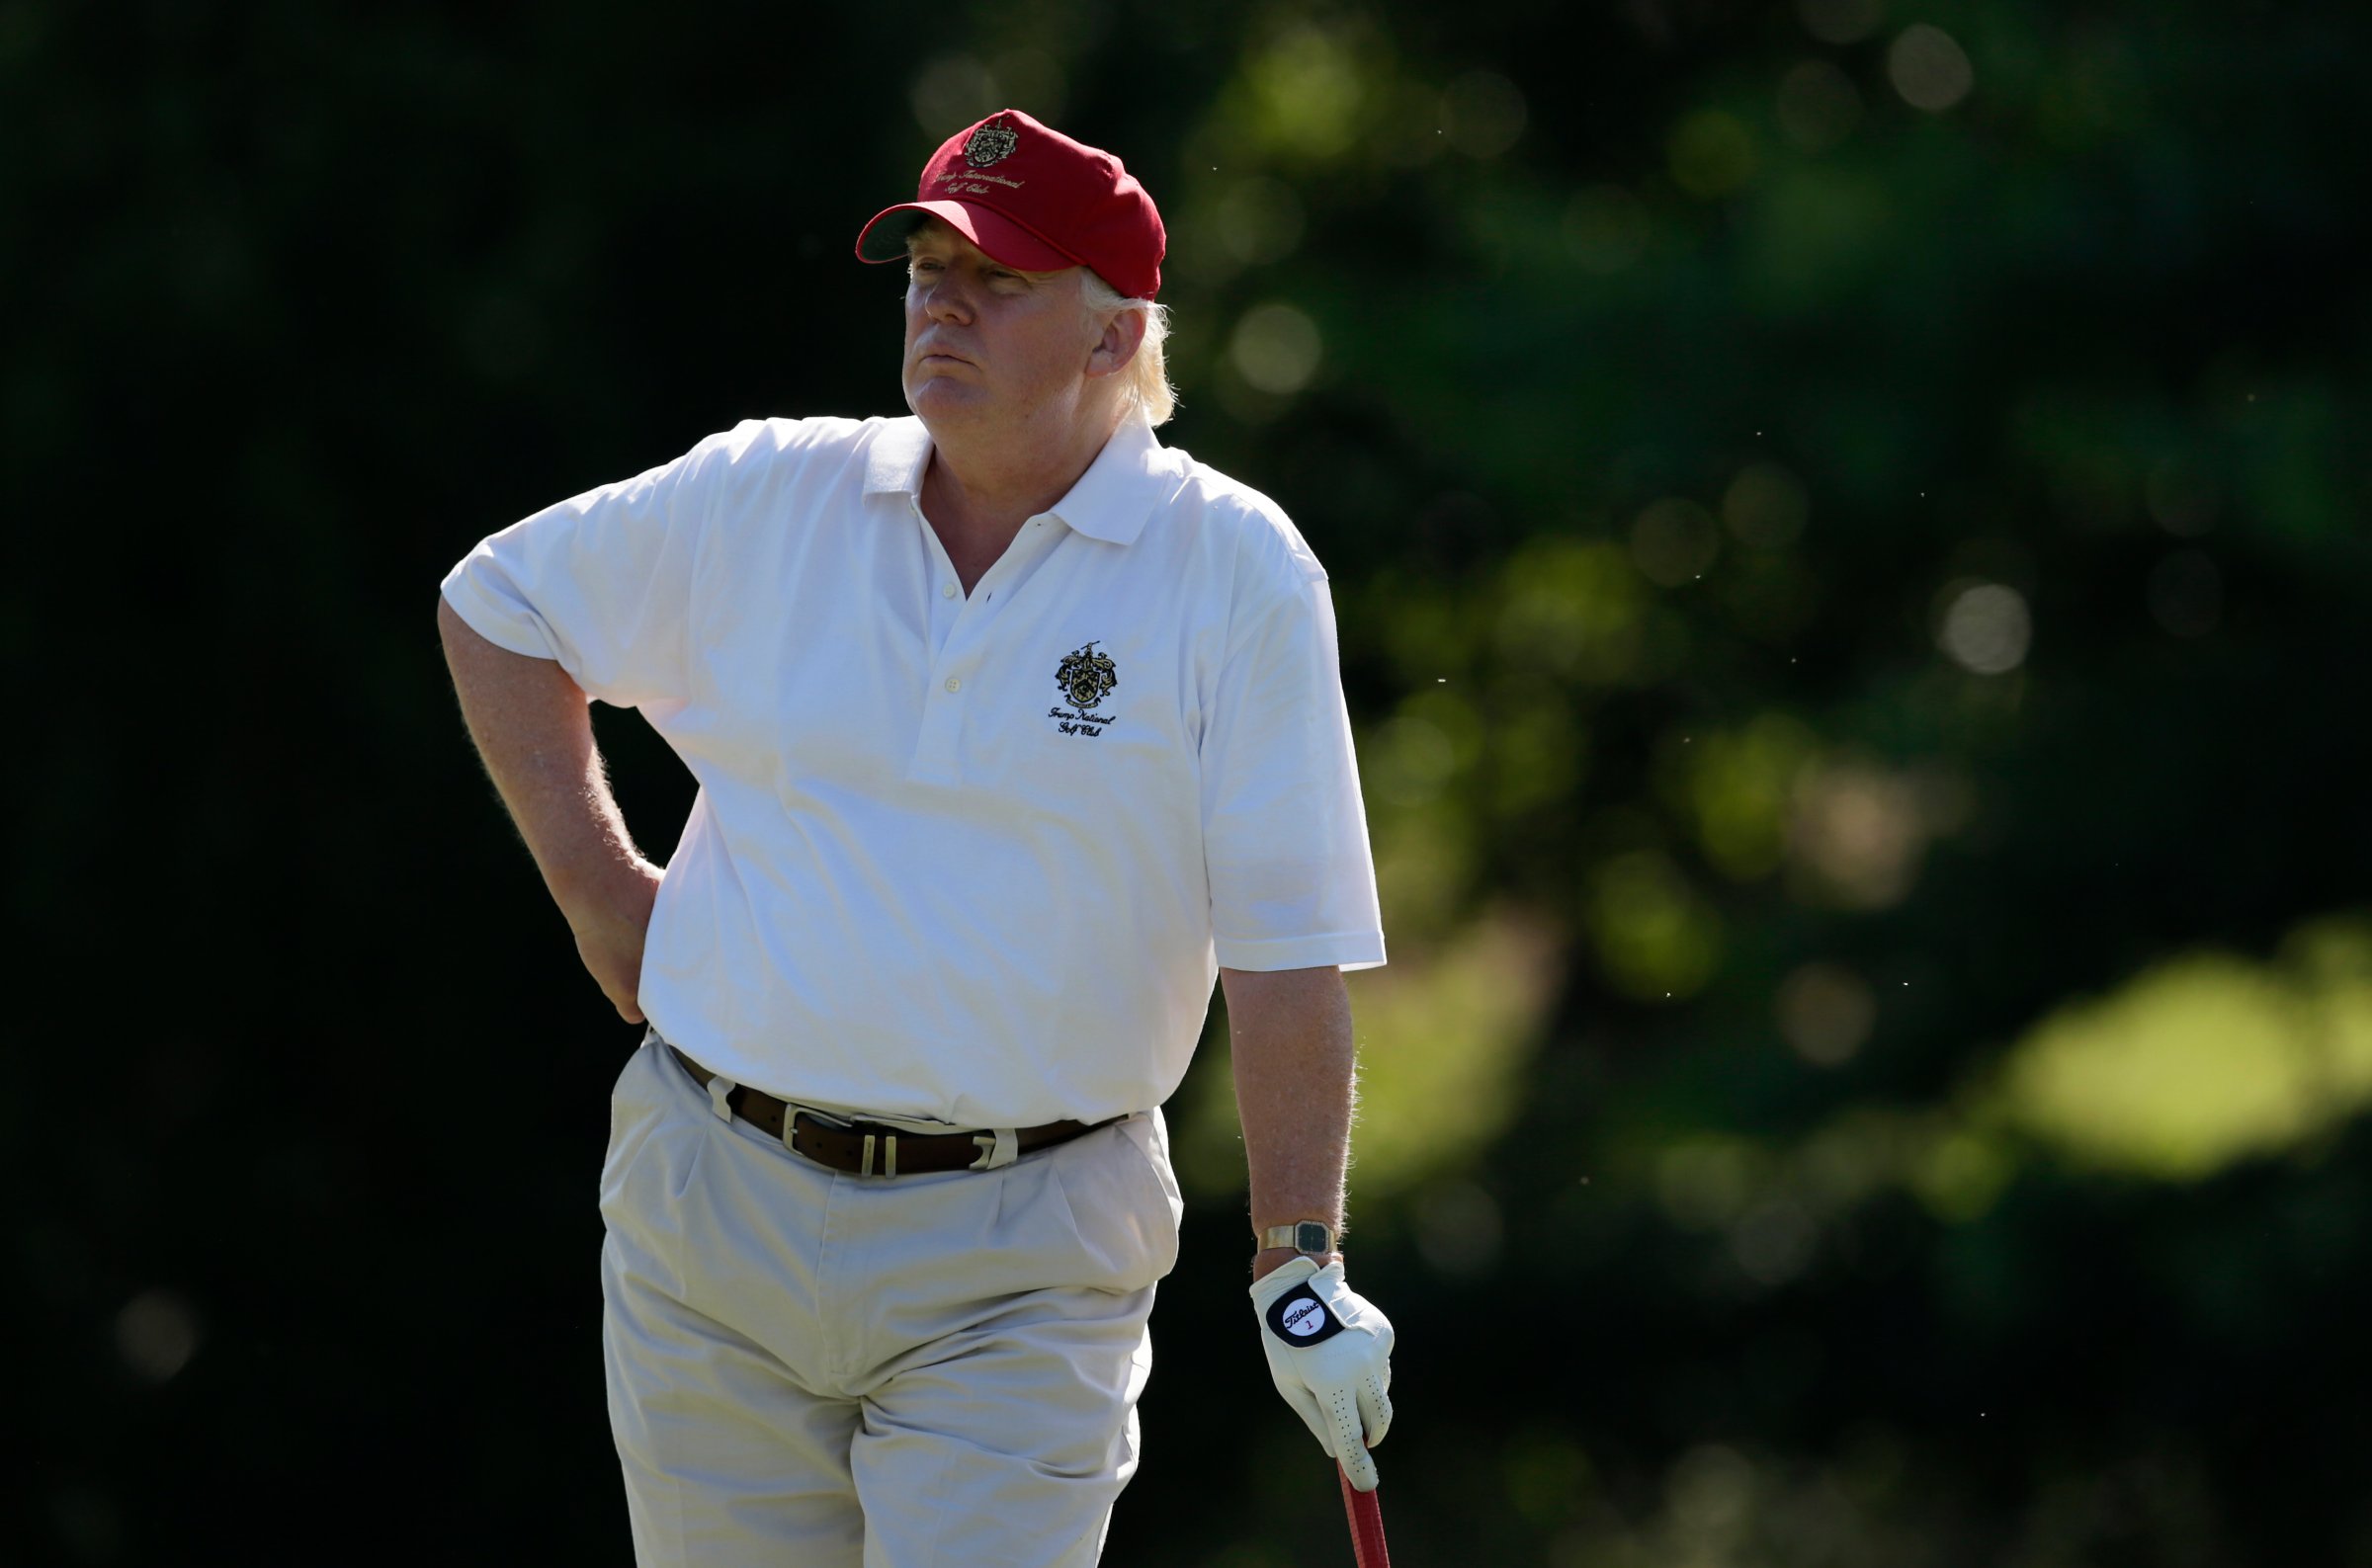 Donald Trump during a pro-am round of the AT&T National golf tournament in Bethesda, Md. on June 27, 2012.